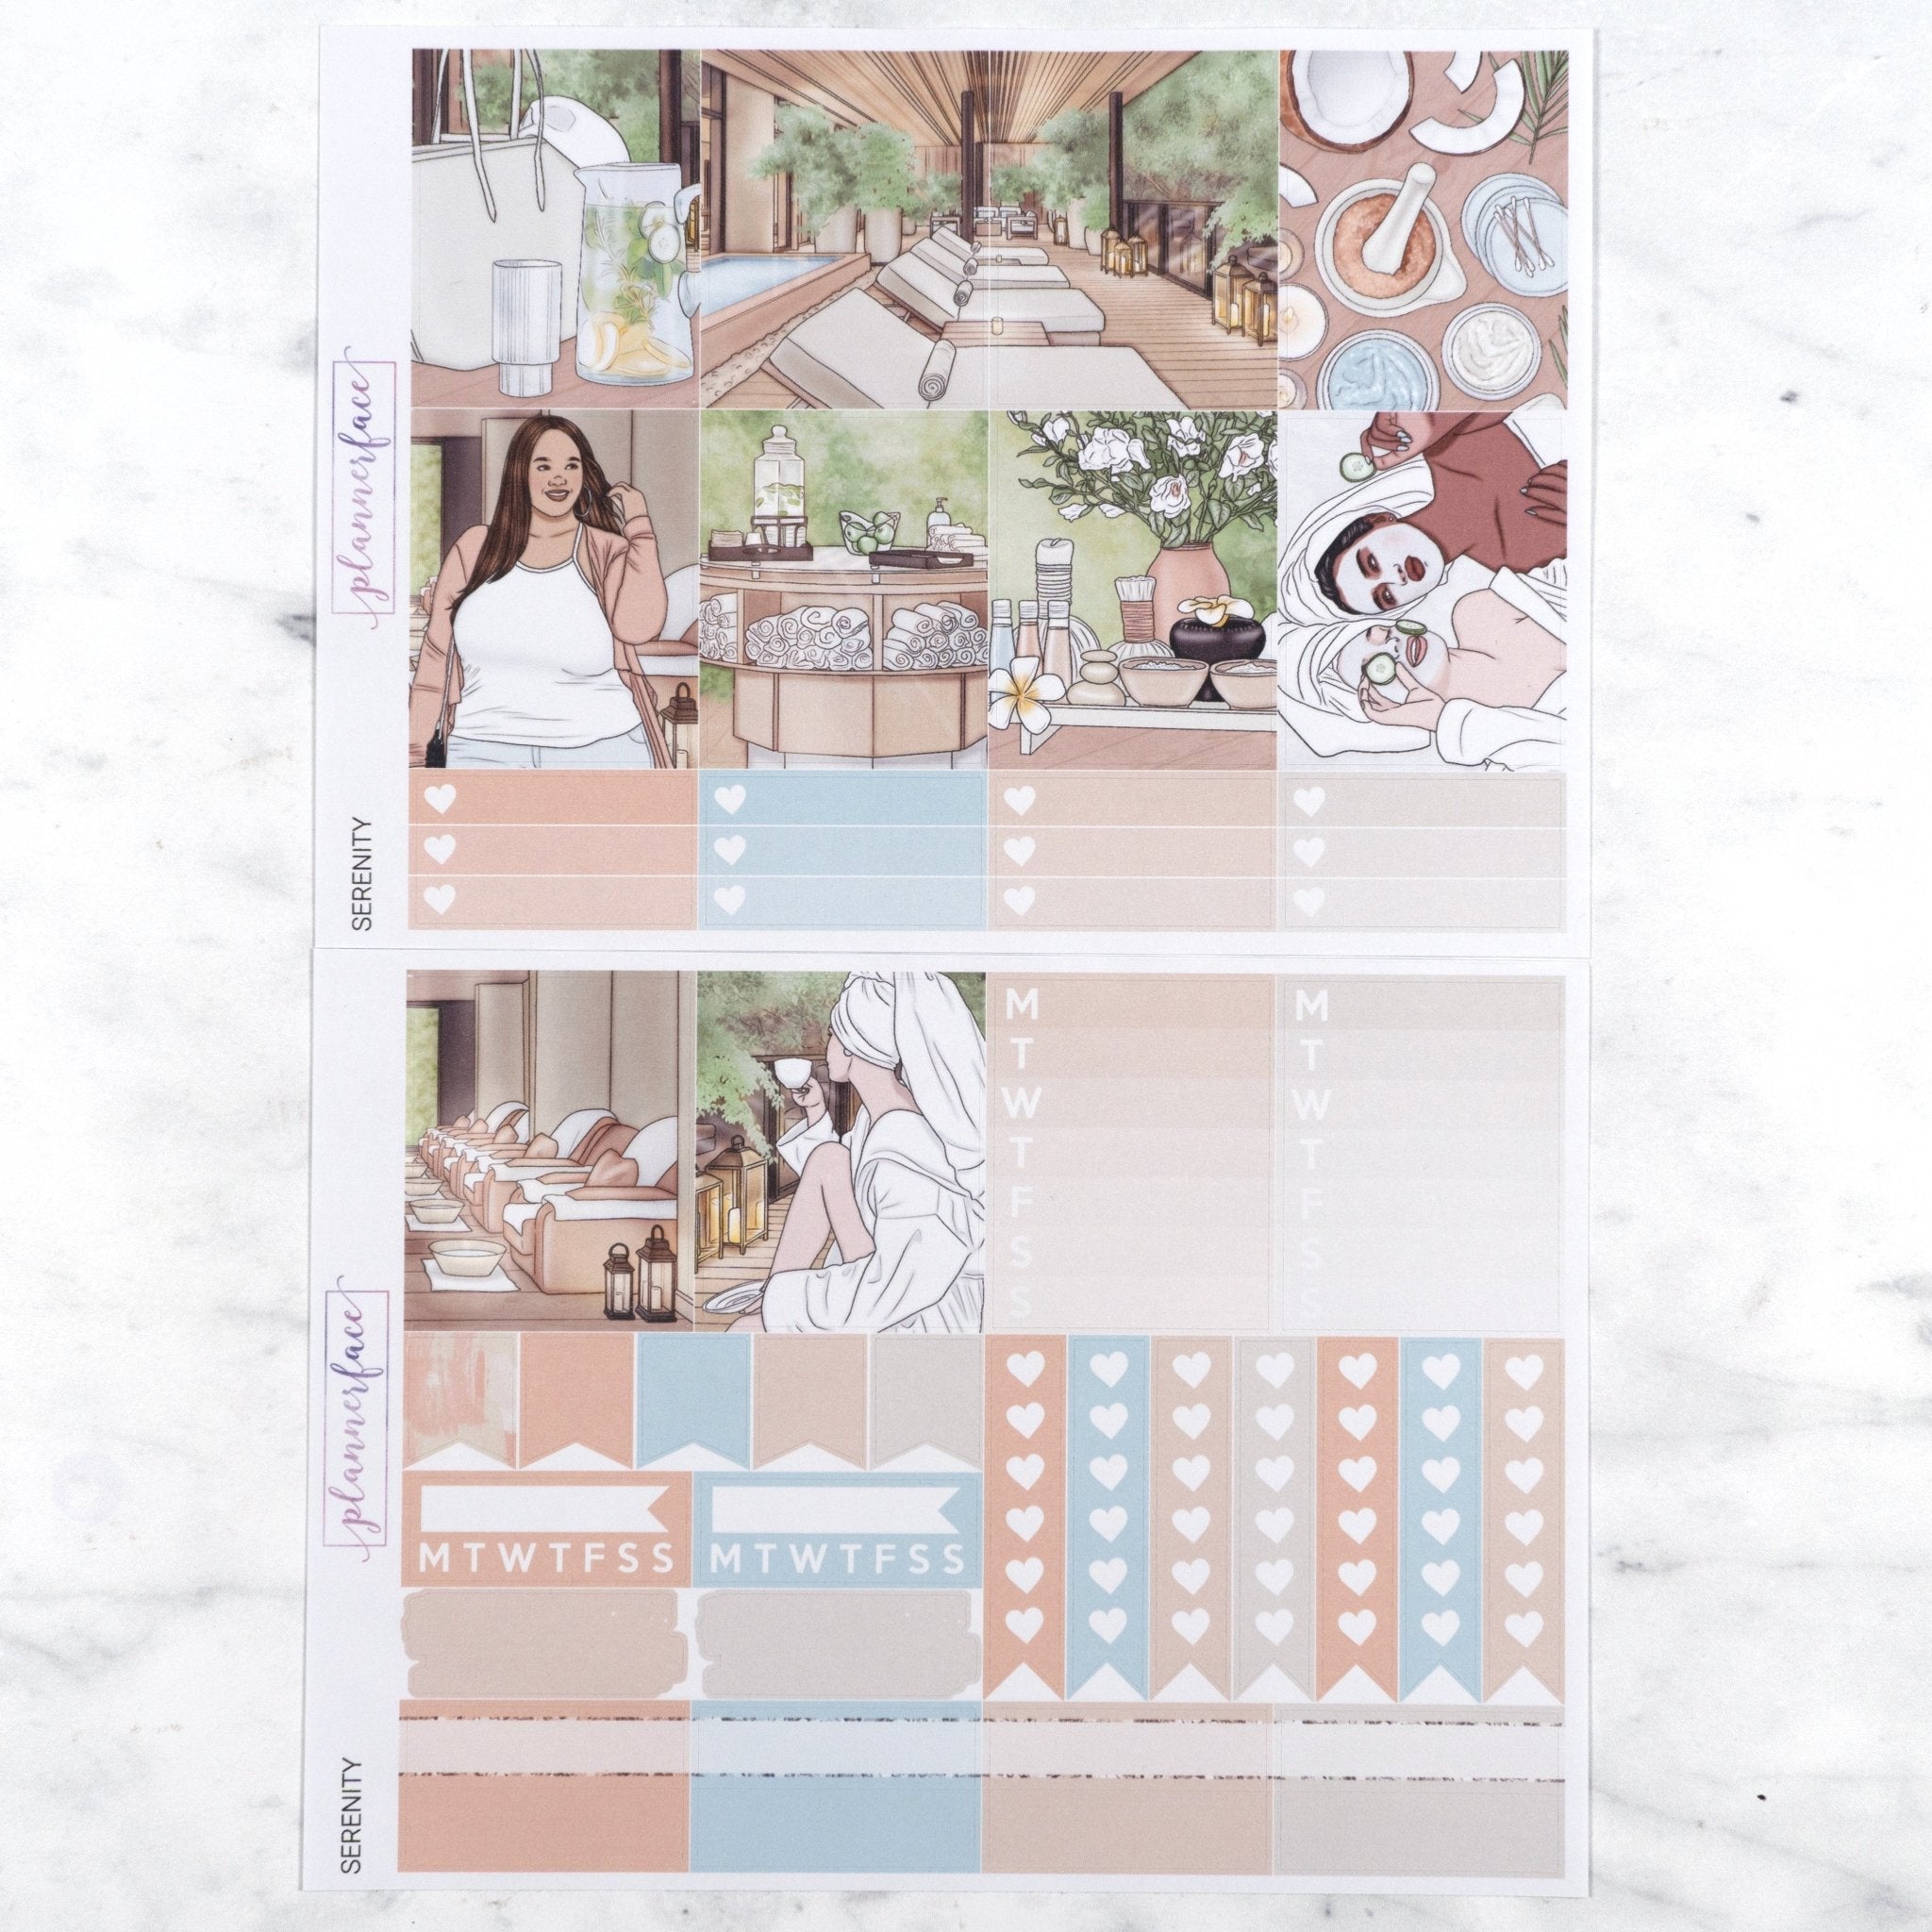 Serenity Weekly Kit by Plannerface